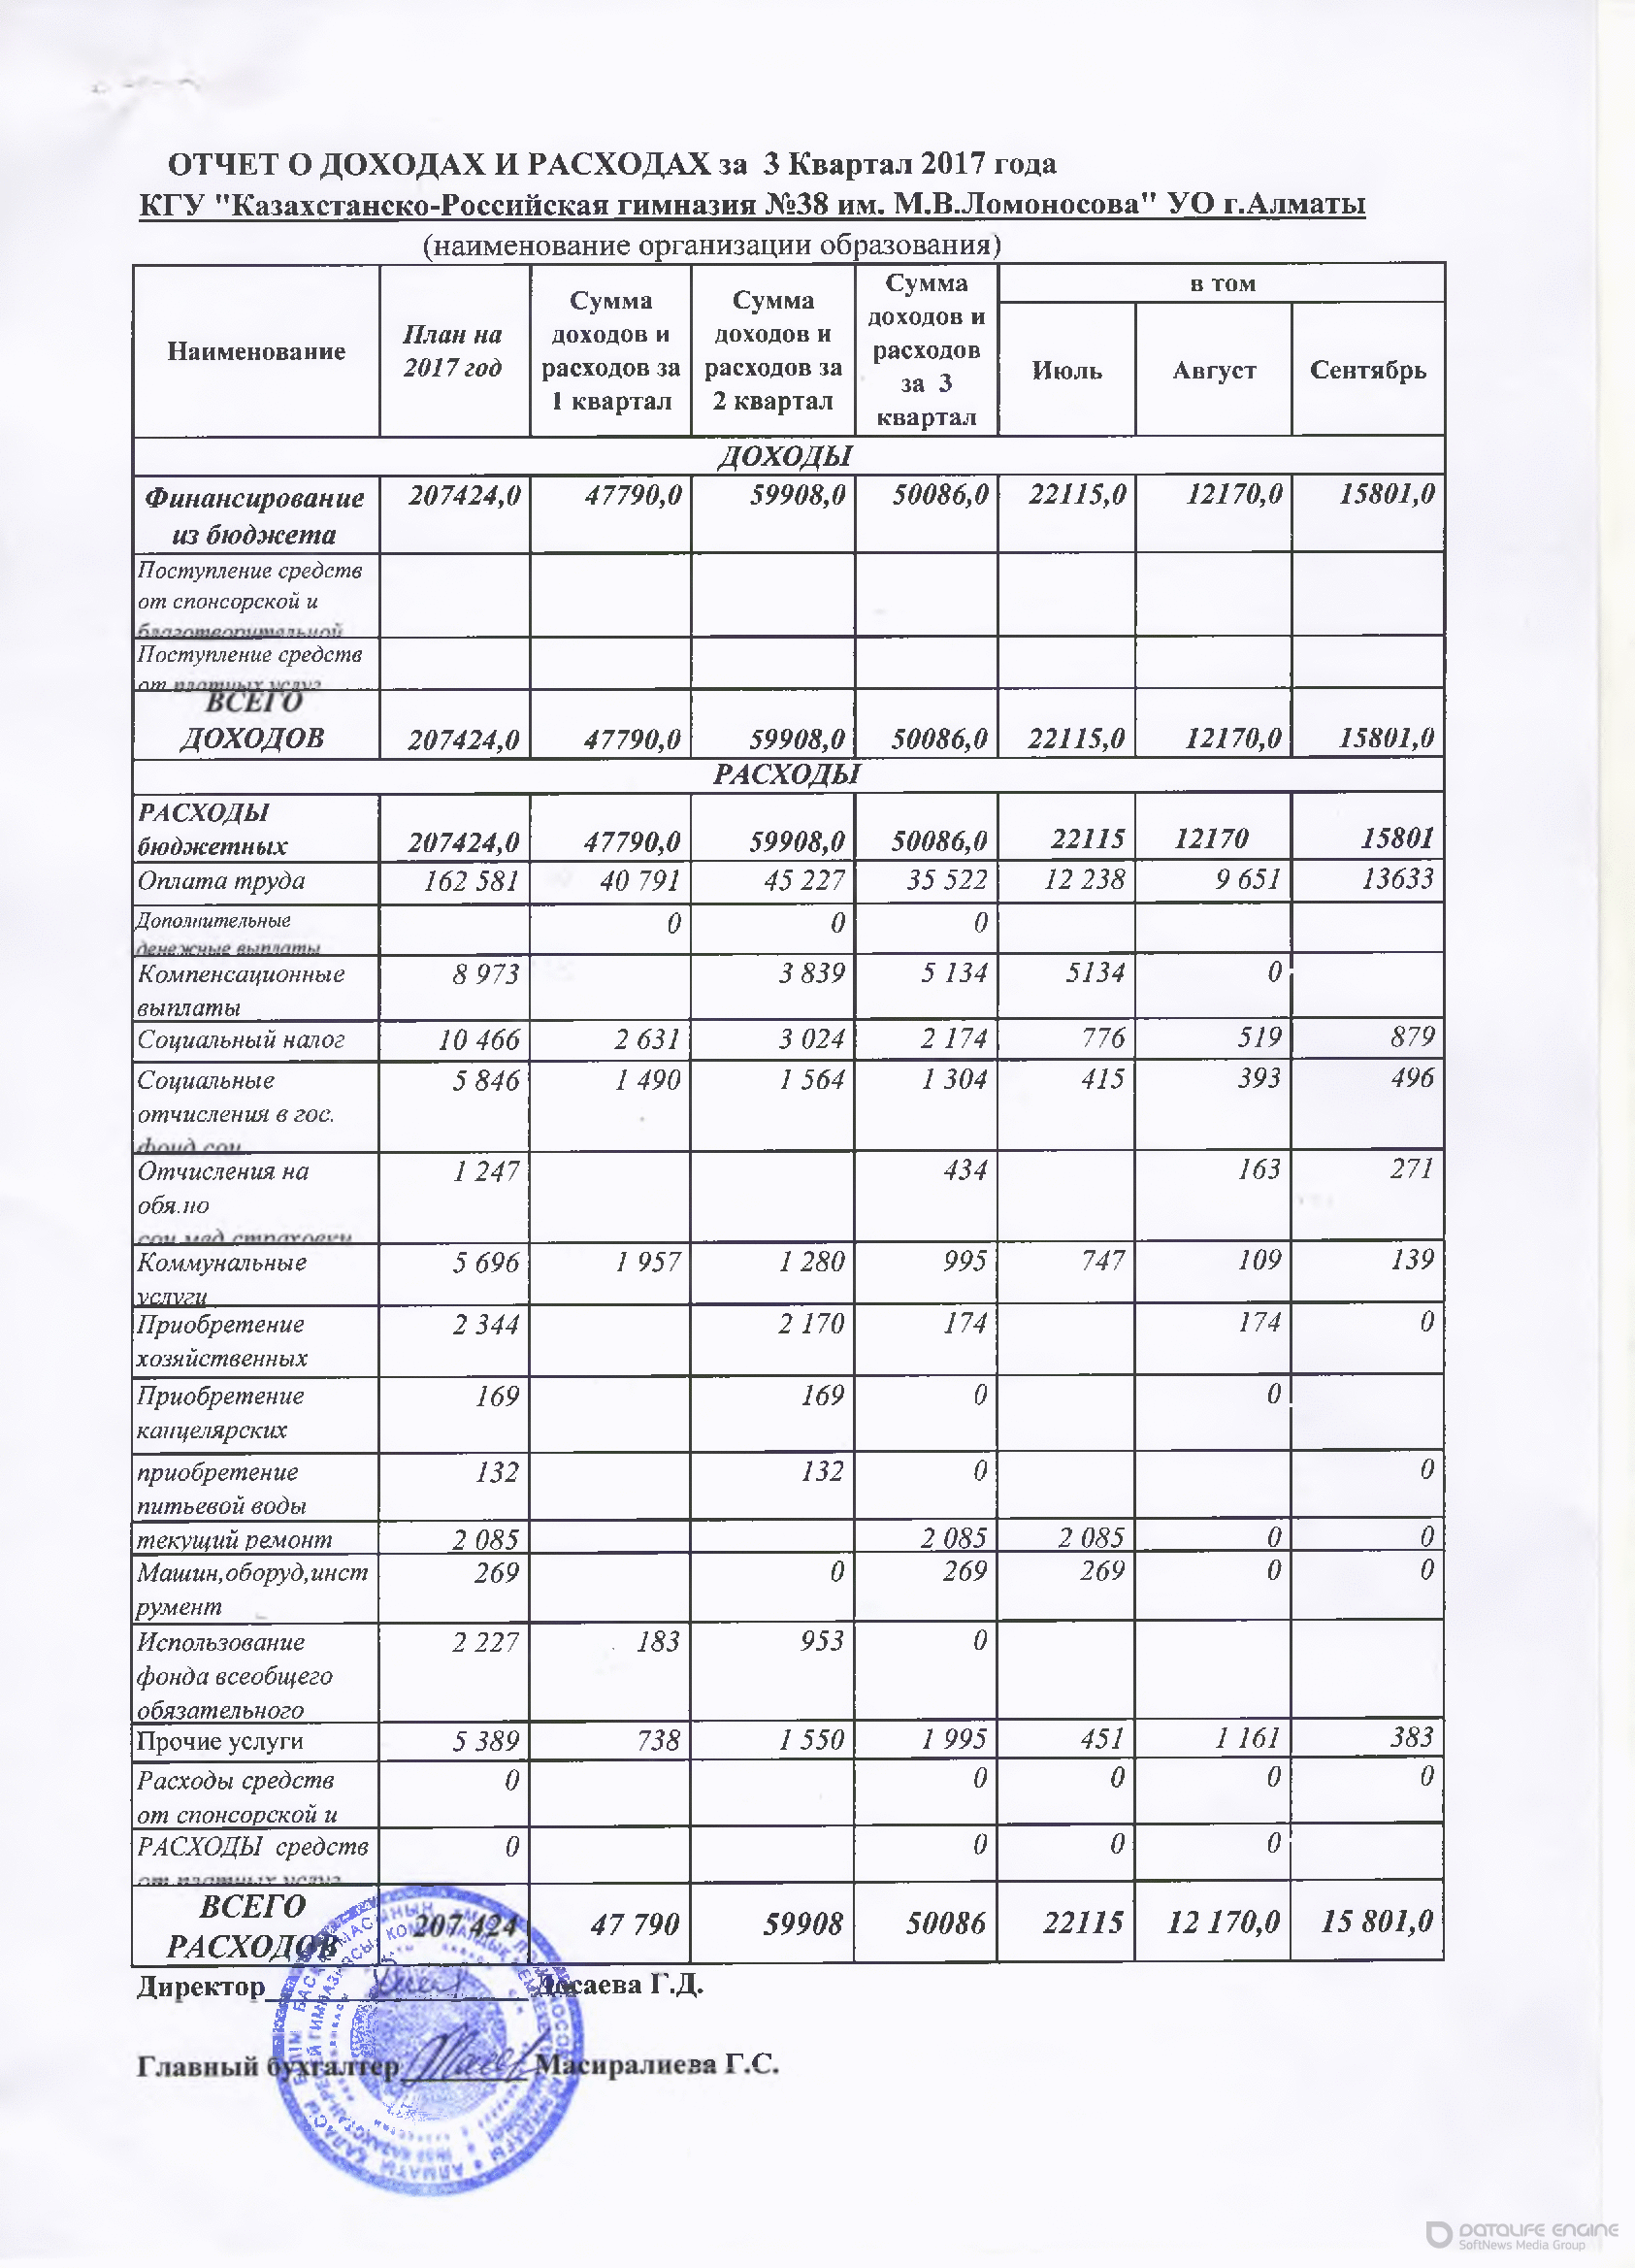 Statement of income and expenses за 3 квартал 2017 г